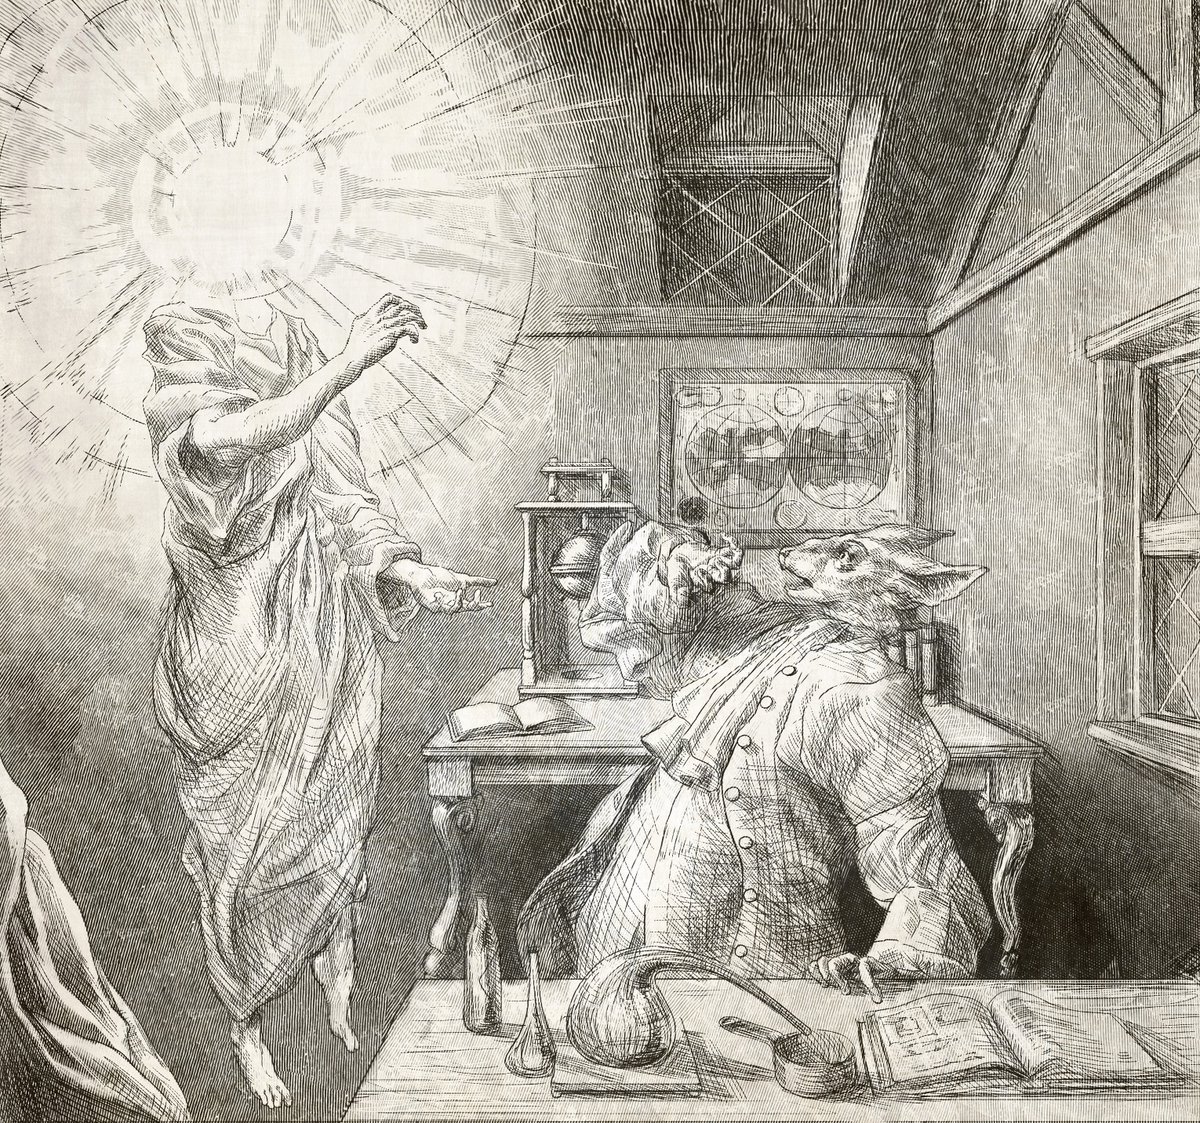 Endrish engraving depicting a natural philosopher being visited by an other-worldly being. 